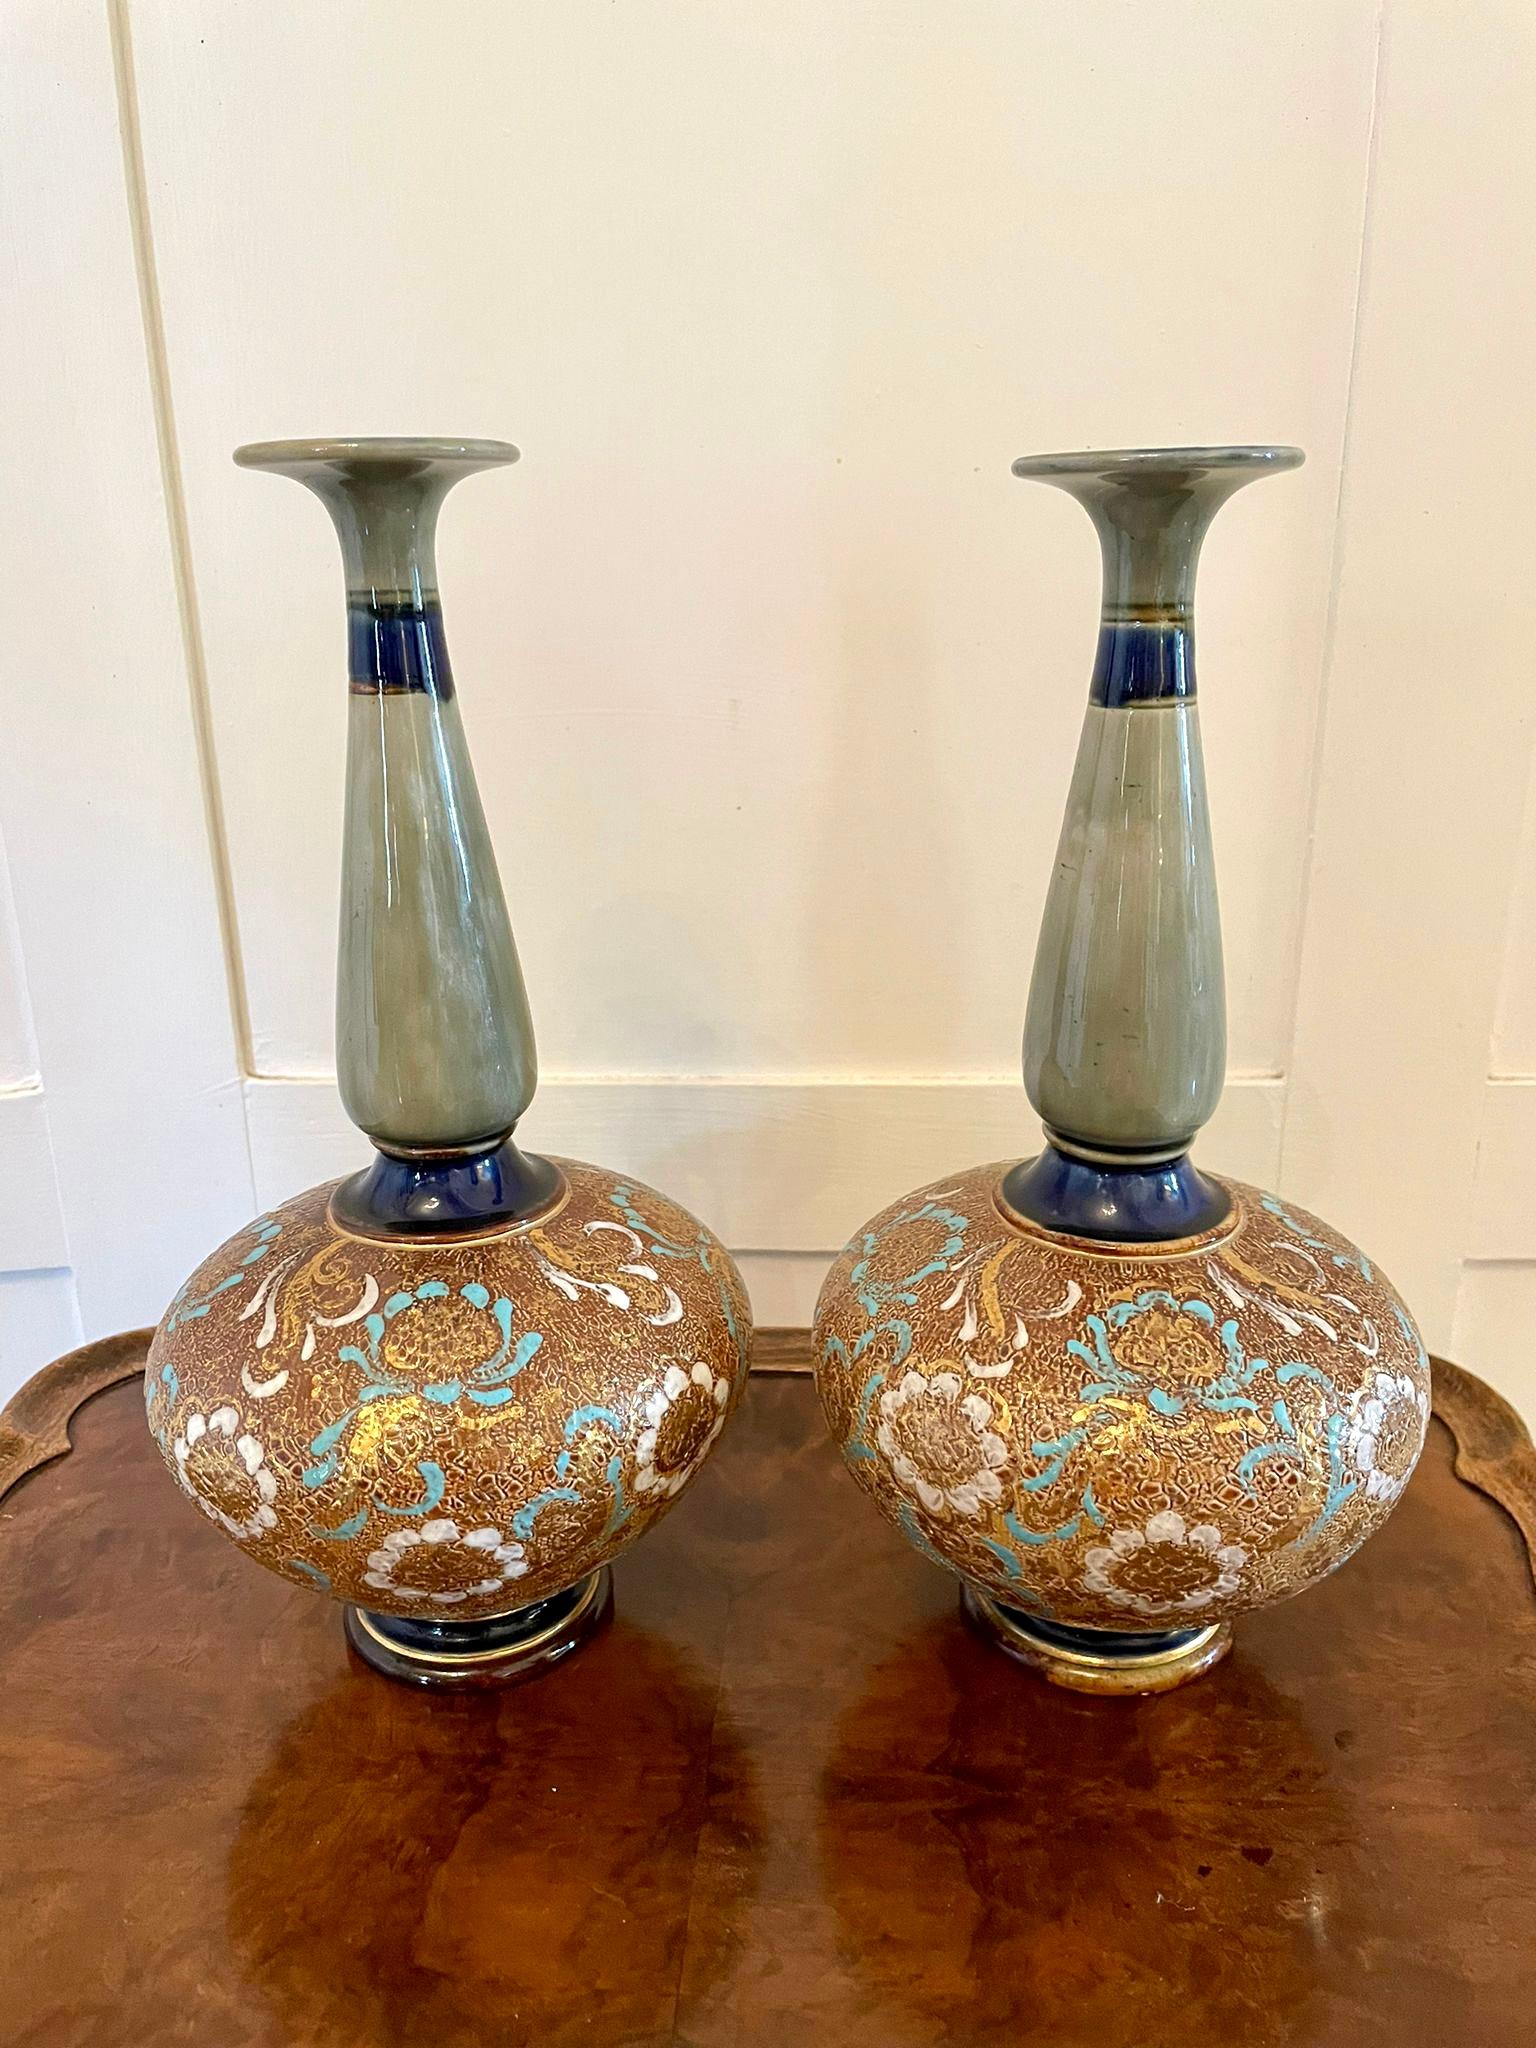 Pair of antique Royal Doulton vases having a shaped slender neck and a round foot, the bodies with white gold and blue enamel petals over the textured ground, the necks and feet in olive, green, gold, brown and blue. They are impressed with the